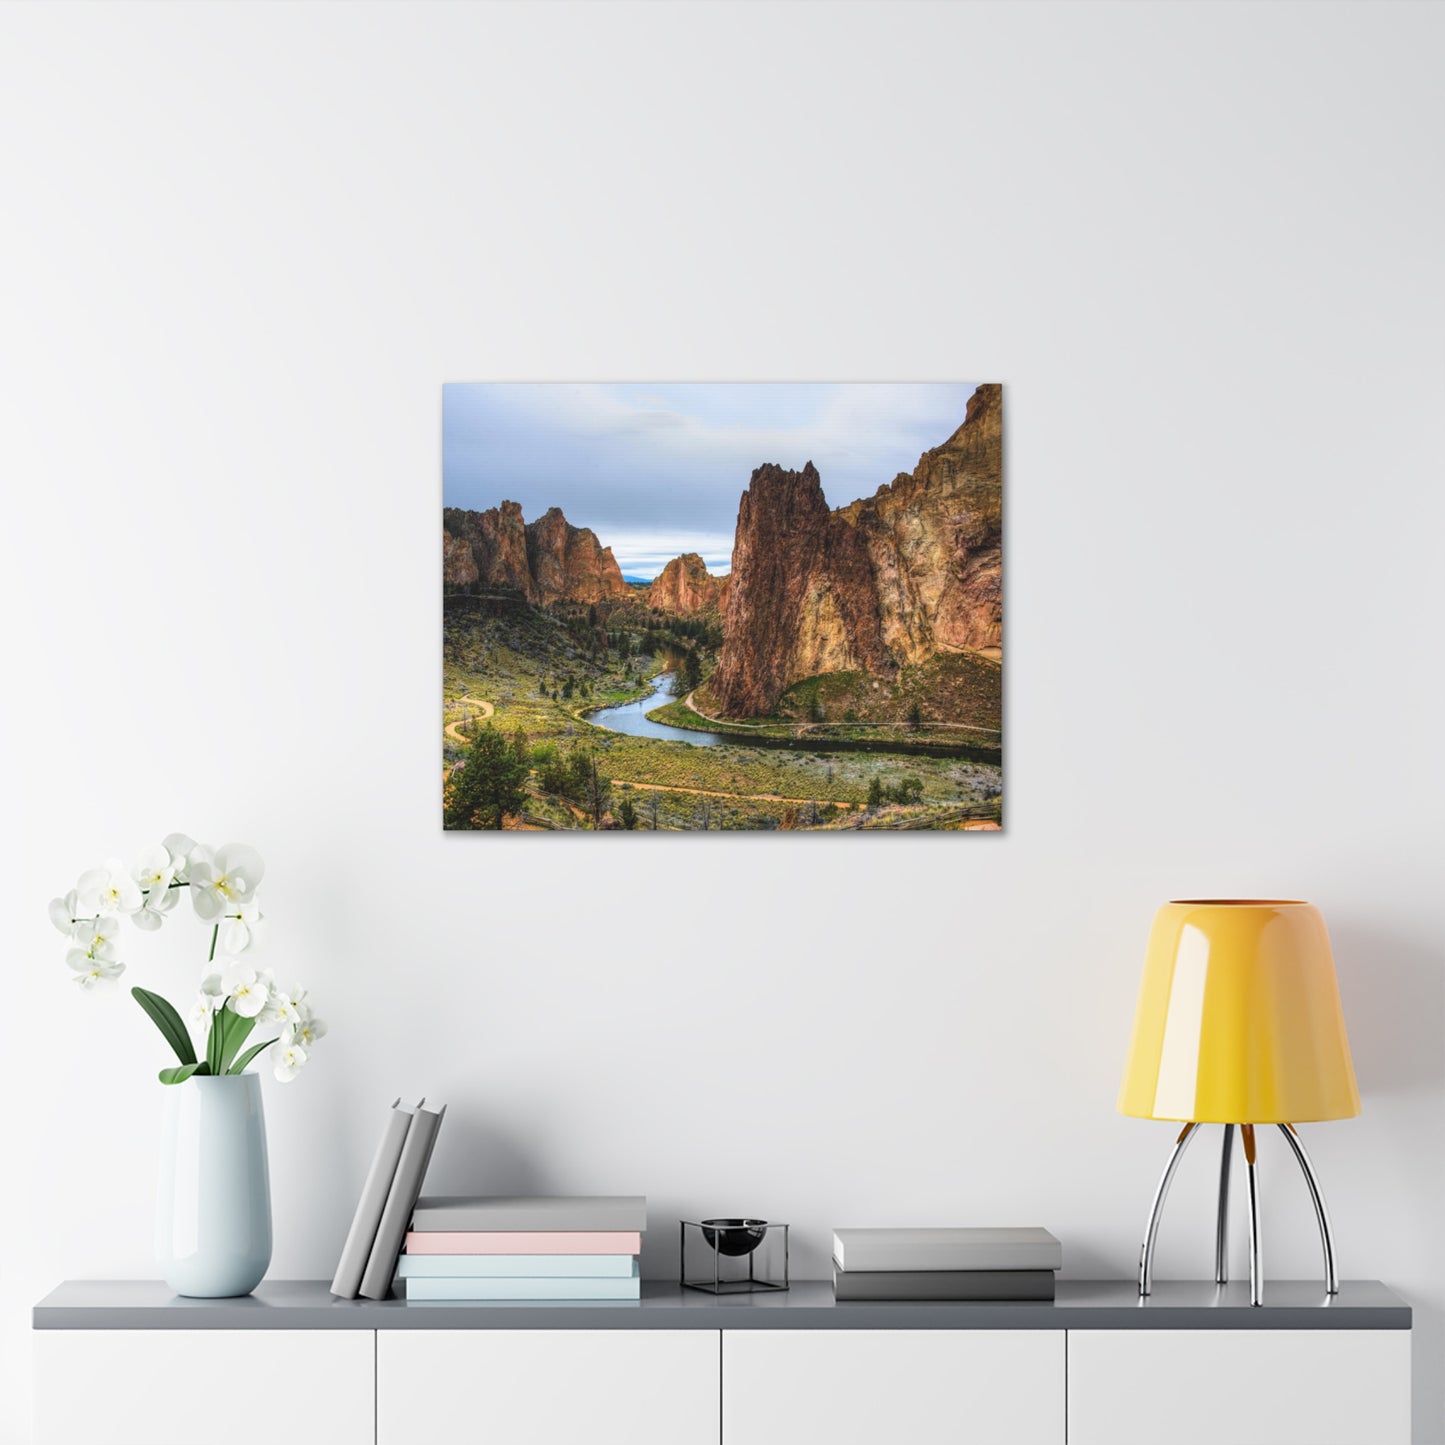 Canvas Print Of Smith Rock In Bend Oregon For Wall Art